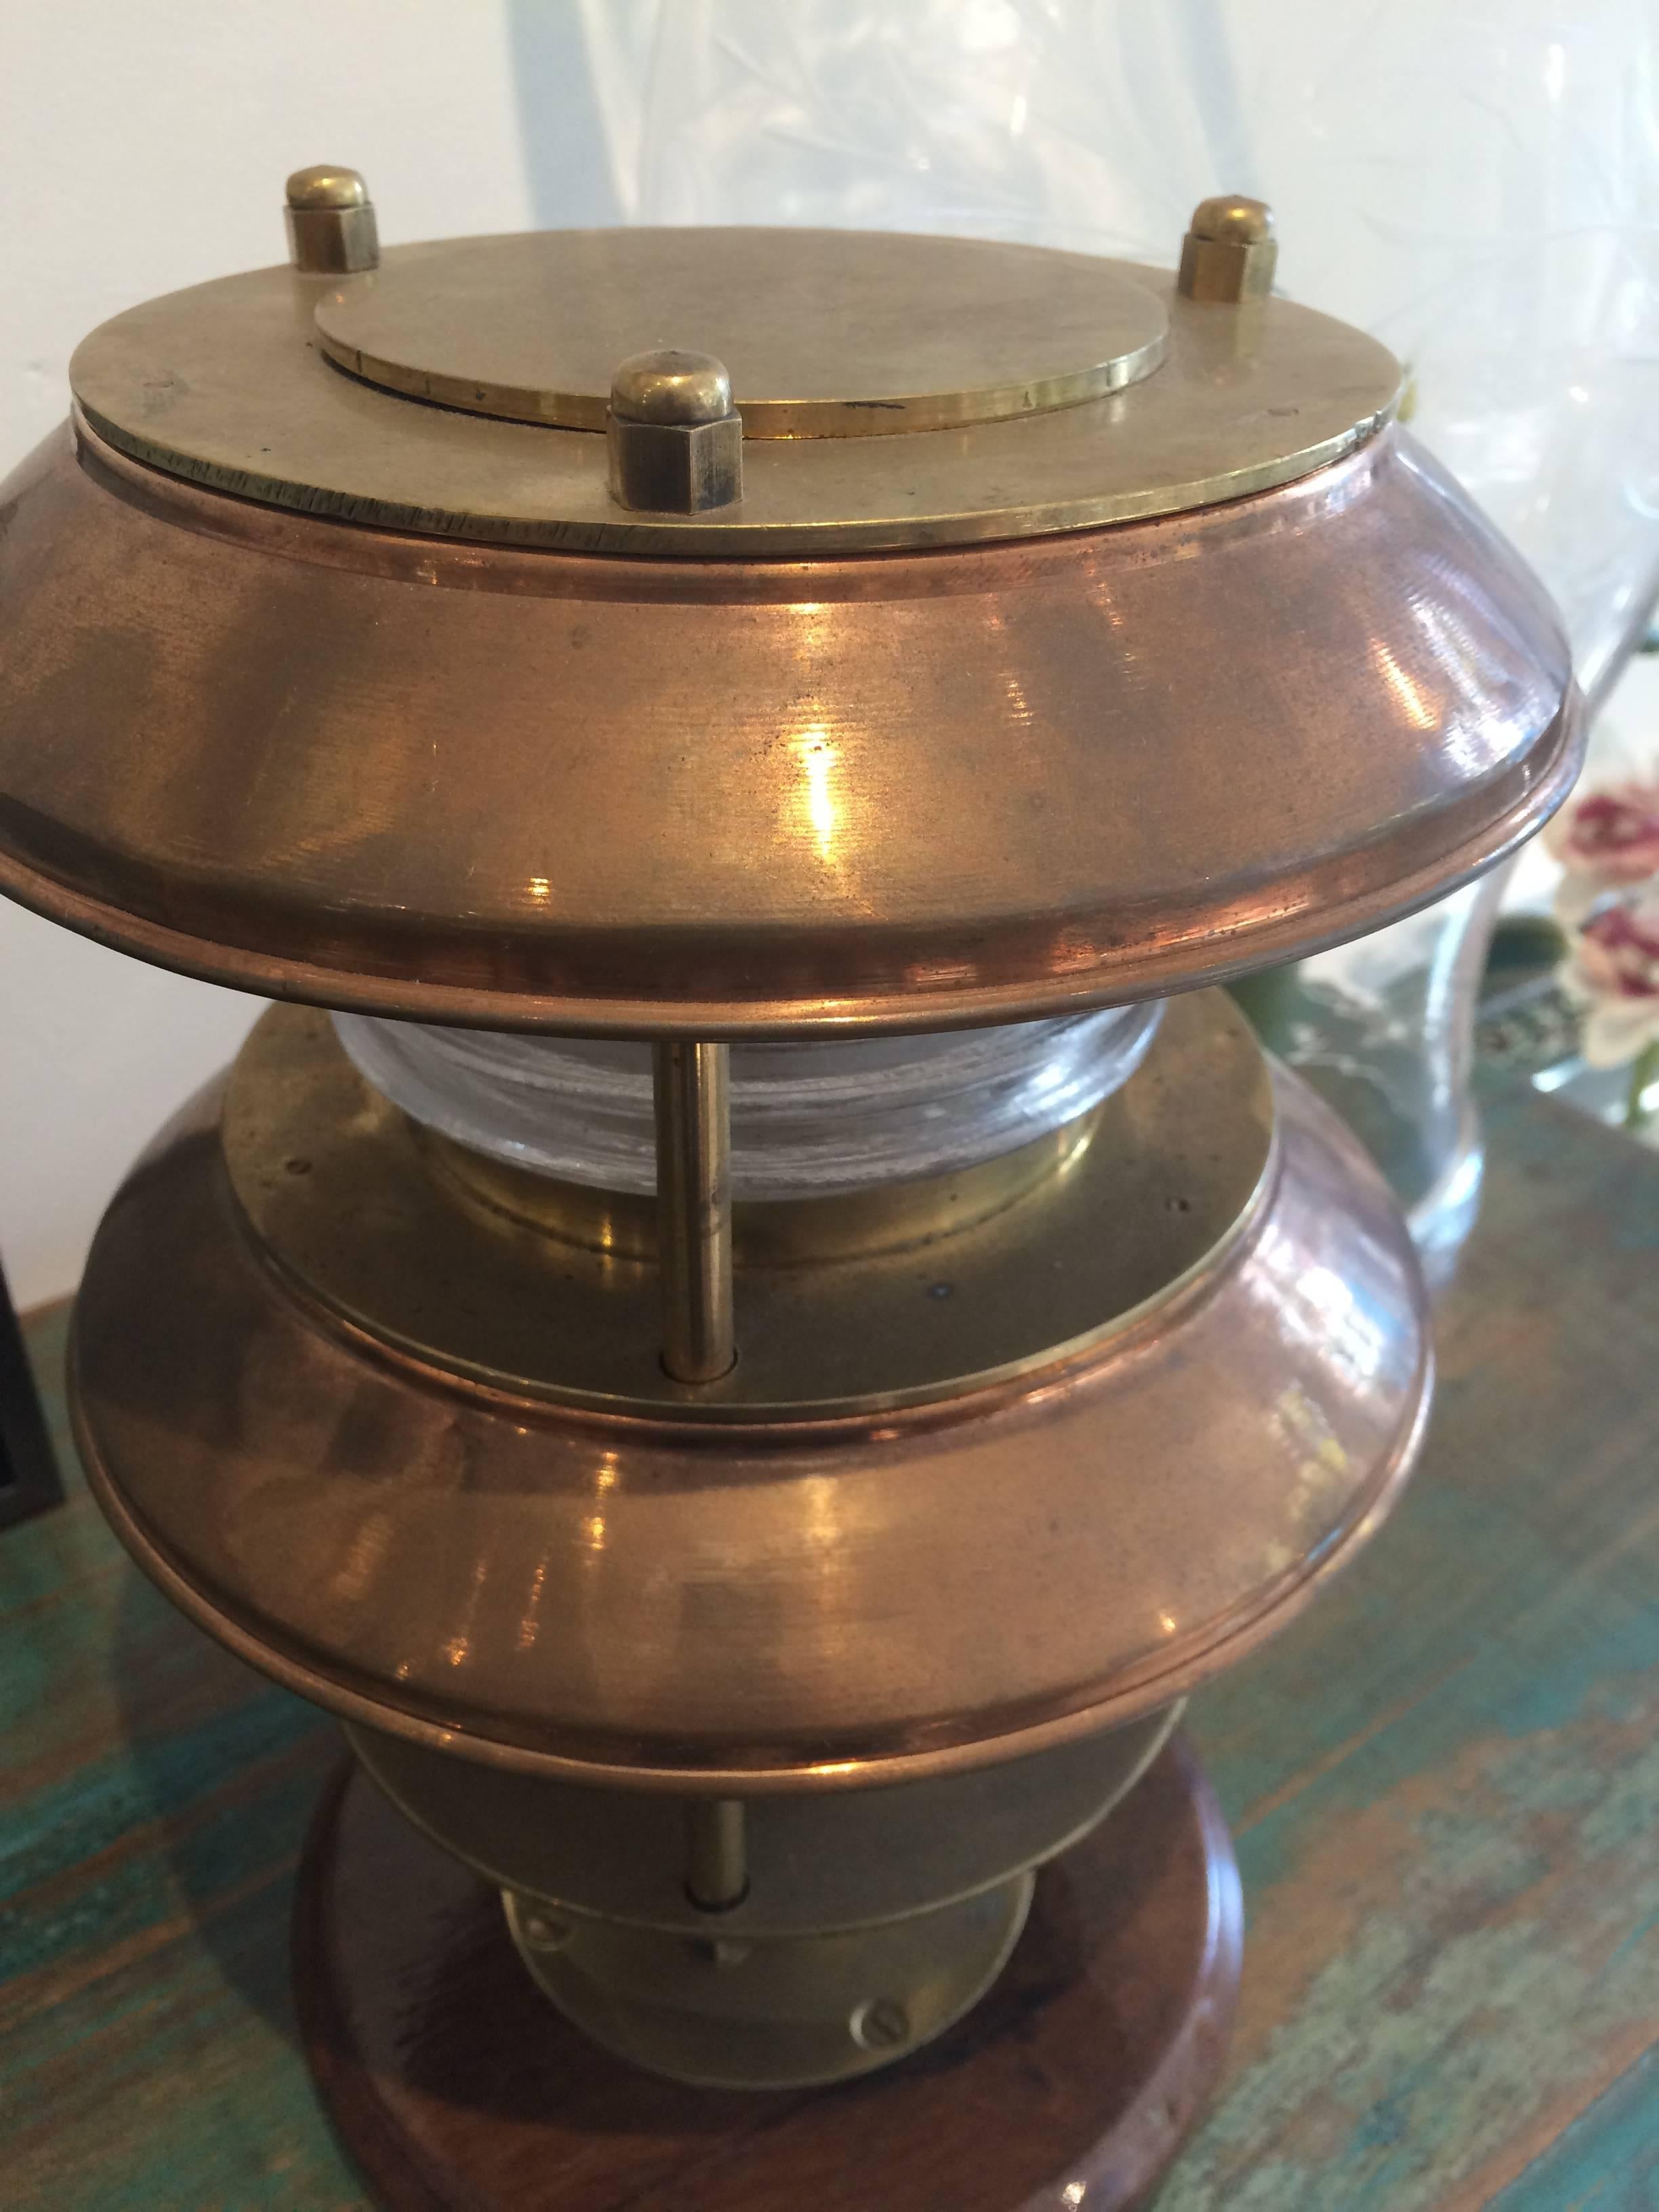 Pair of ship's post lights, copper and brass with fresnel lens. The teak base has been added. It takes a regular size bulb and has been rewired for American use. Mid-Century.

Nautical antiques located on Nantucket Island.